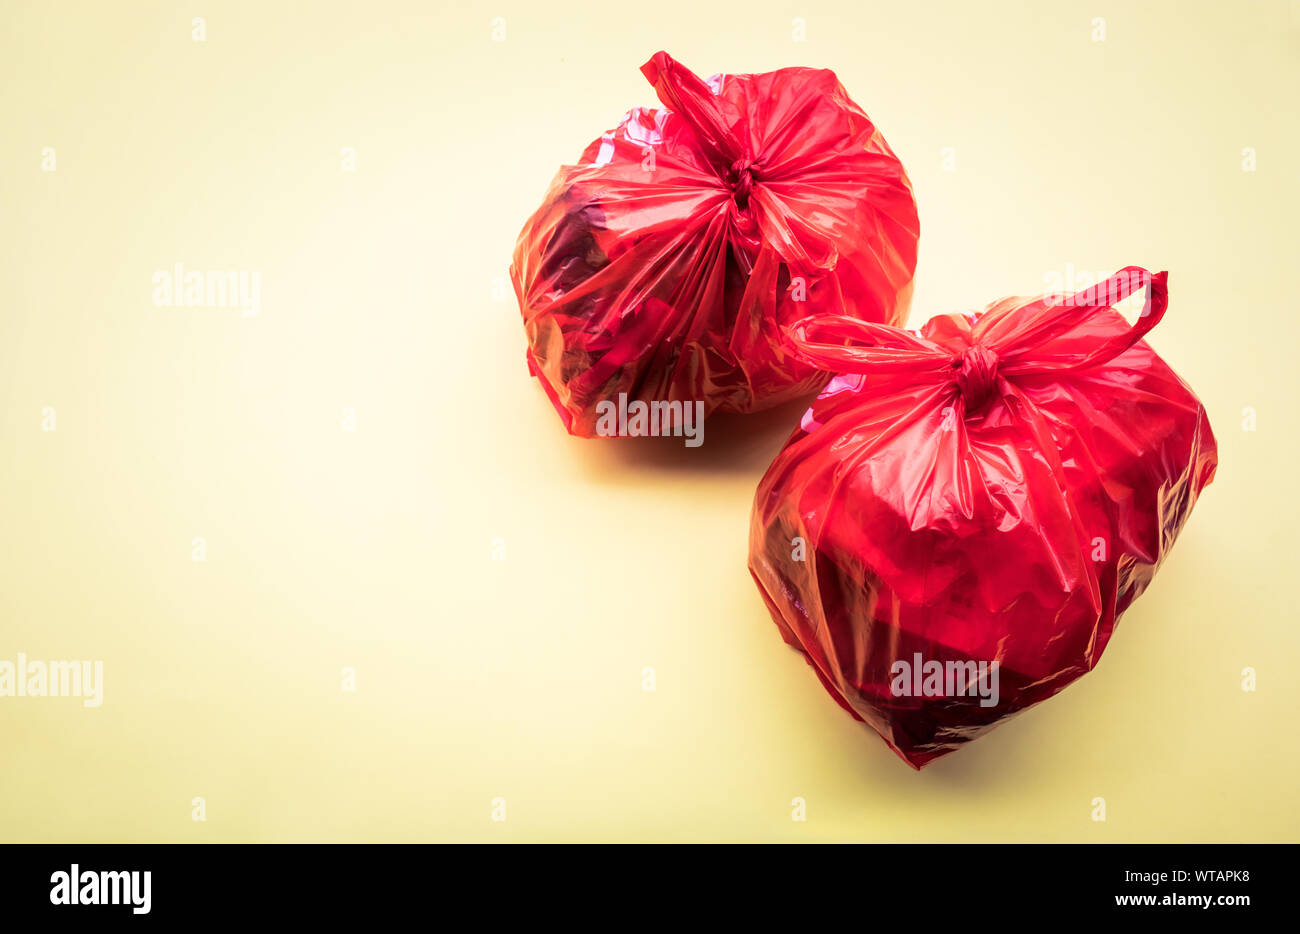 Food trash packing in red plastic bag on color background. Recycle and environment concepts ideas Stock Photo